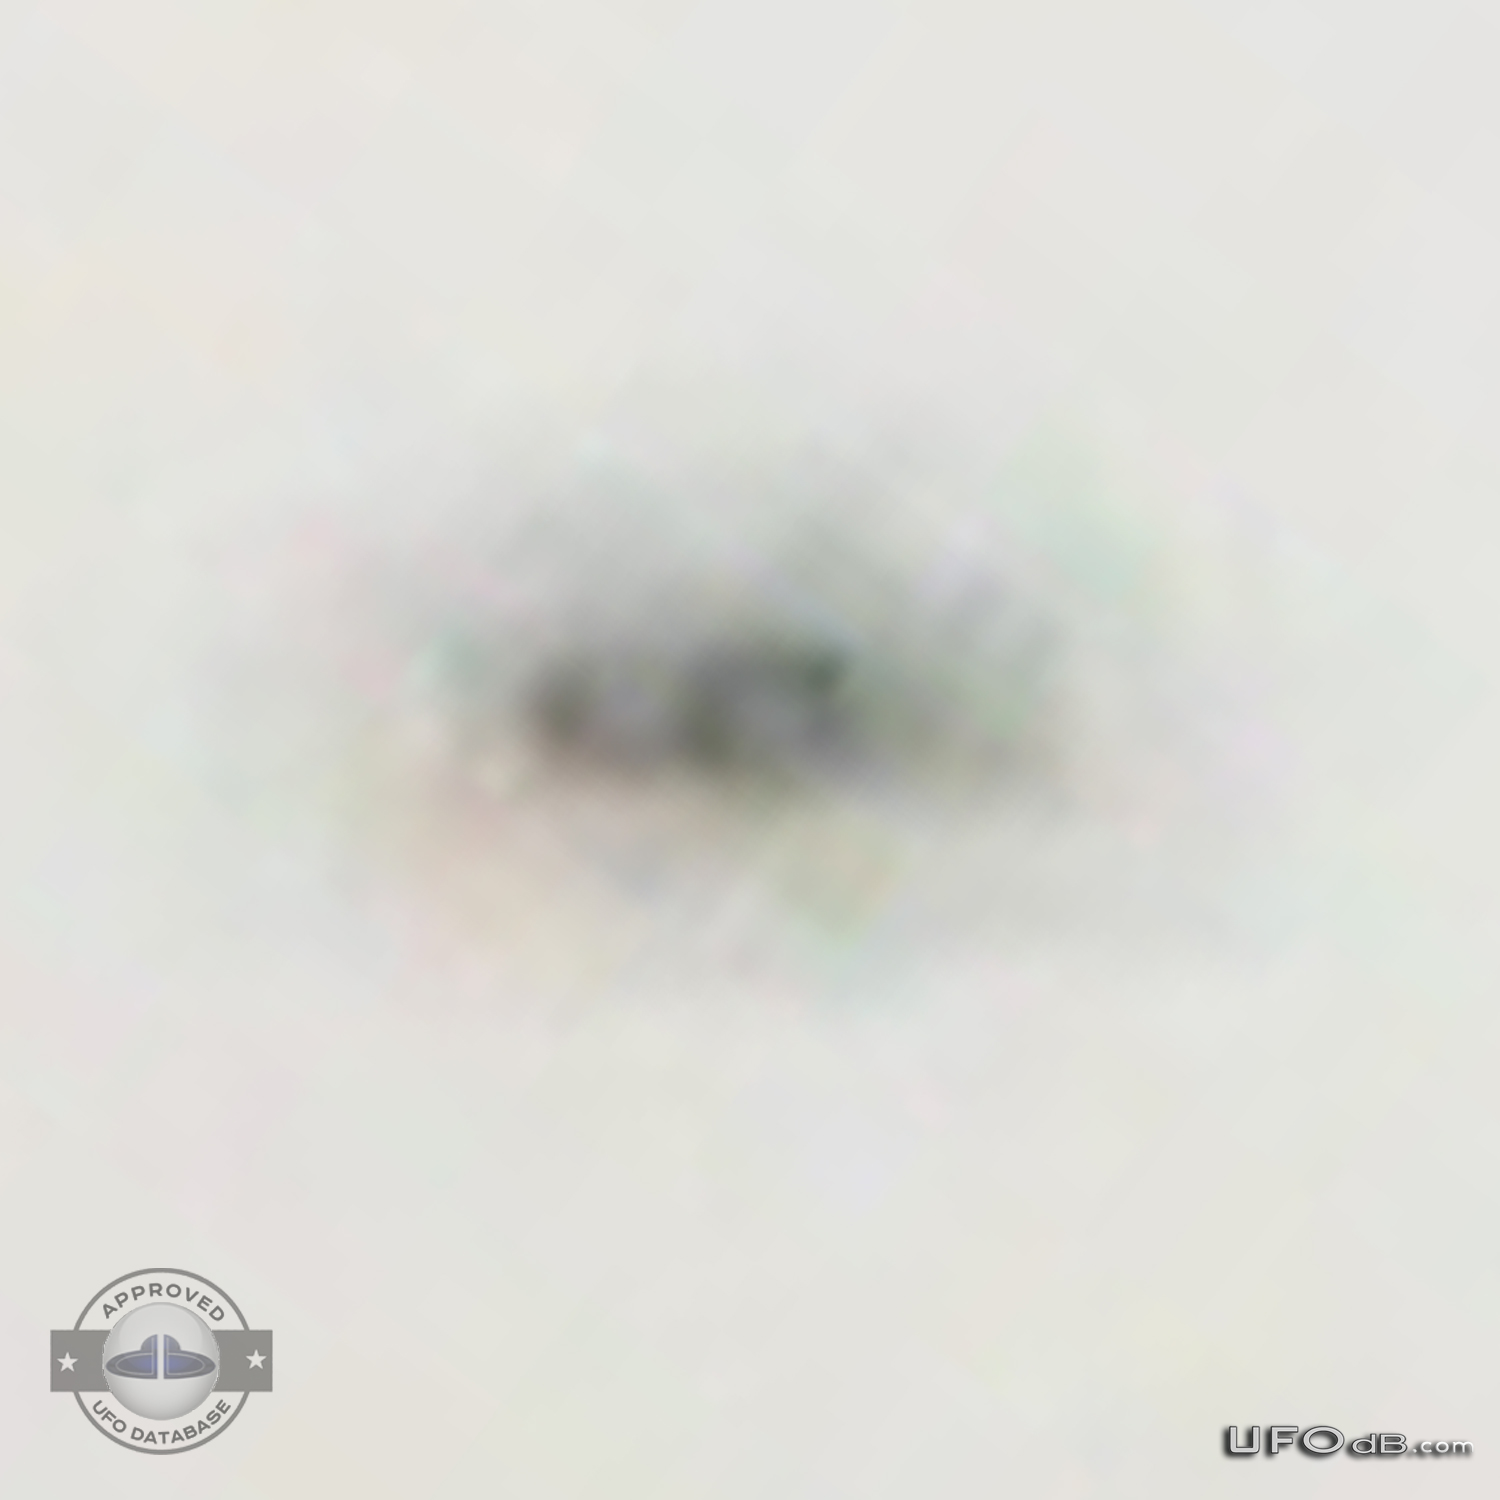 While looking at planes a Man see a UFO - Cauca, Colombia - March 2011 UFO Picture #280-6